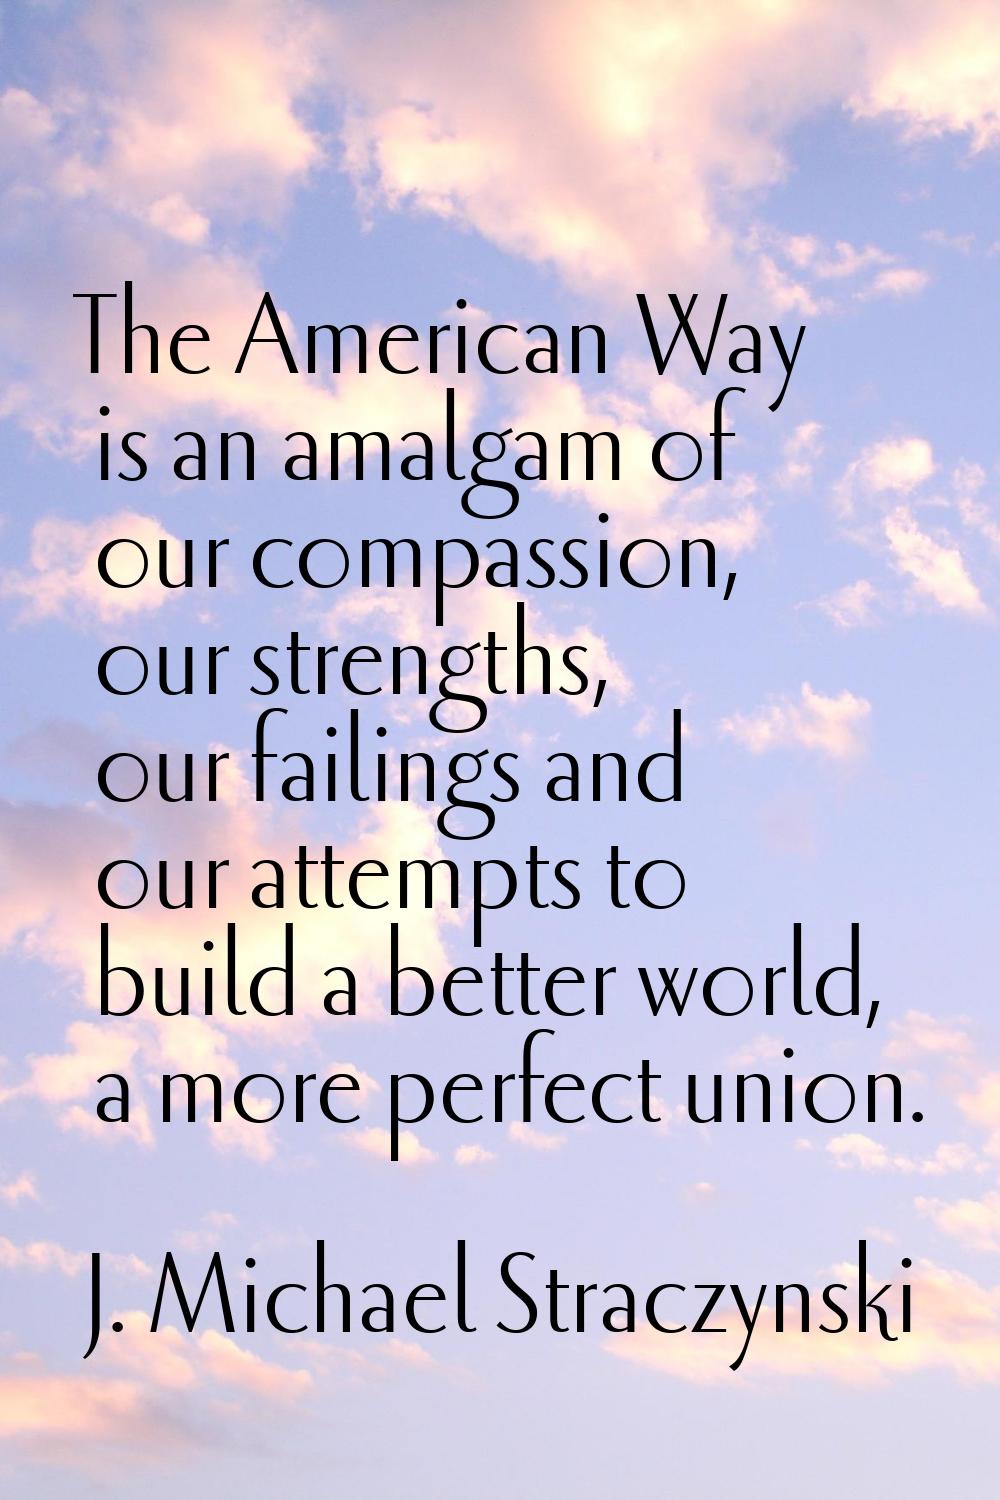 The American Way is an amalgam of our compassion, our strengths, our failings and our attempts to b